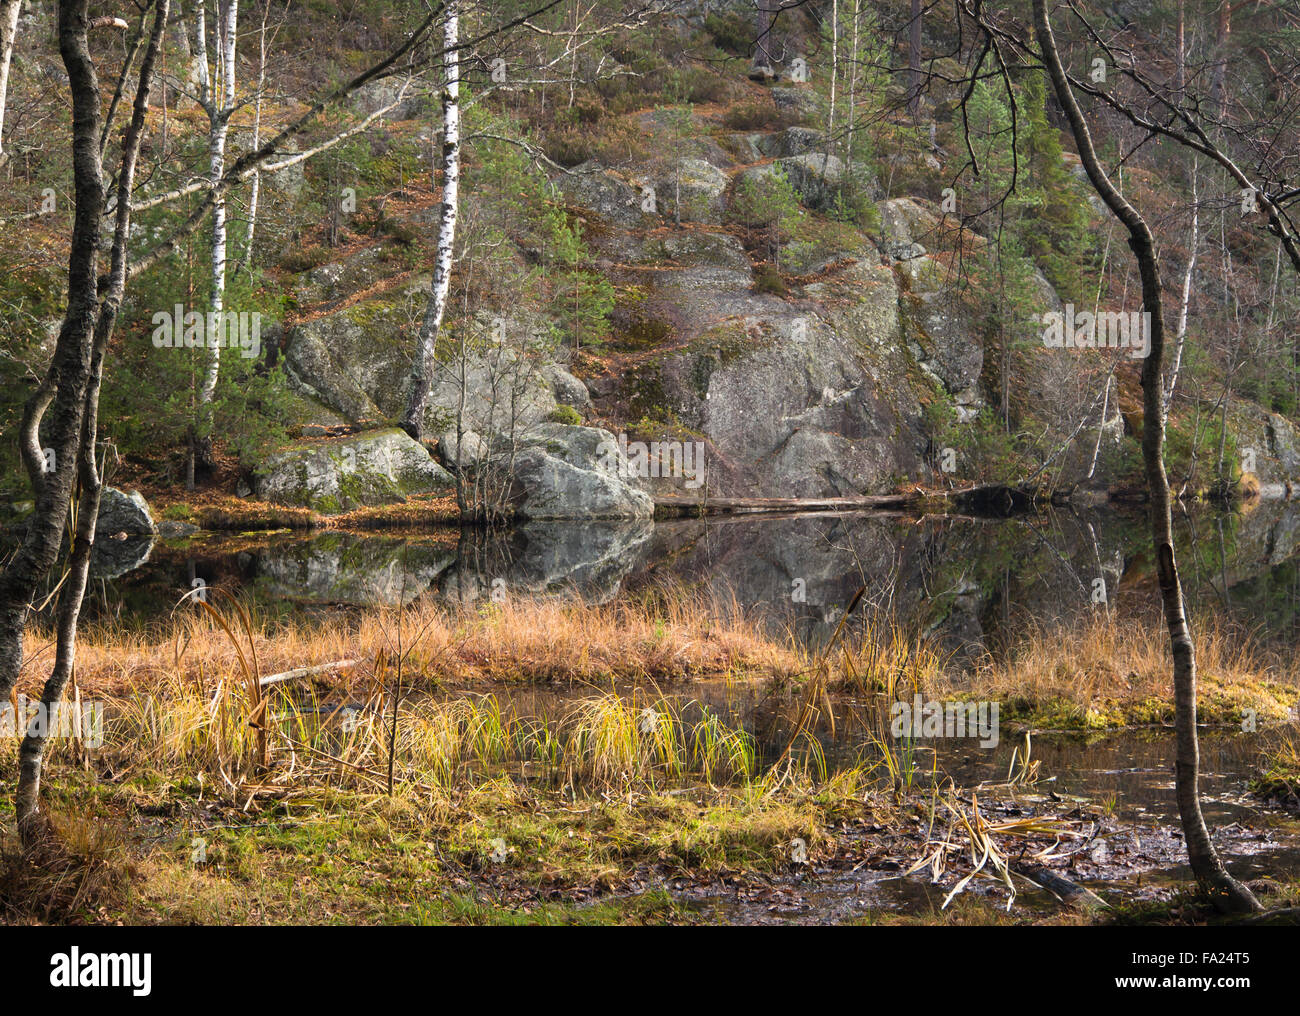 Late Autumn In A Forest In Oslo Norway A Small Lake Reflections